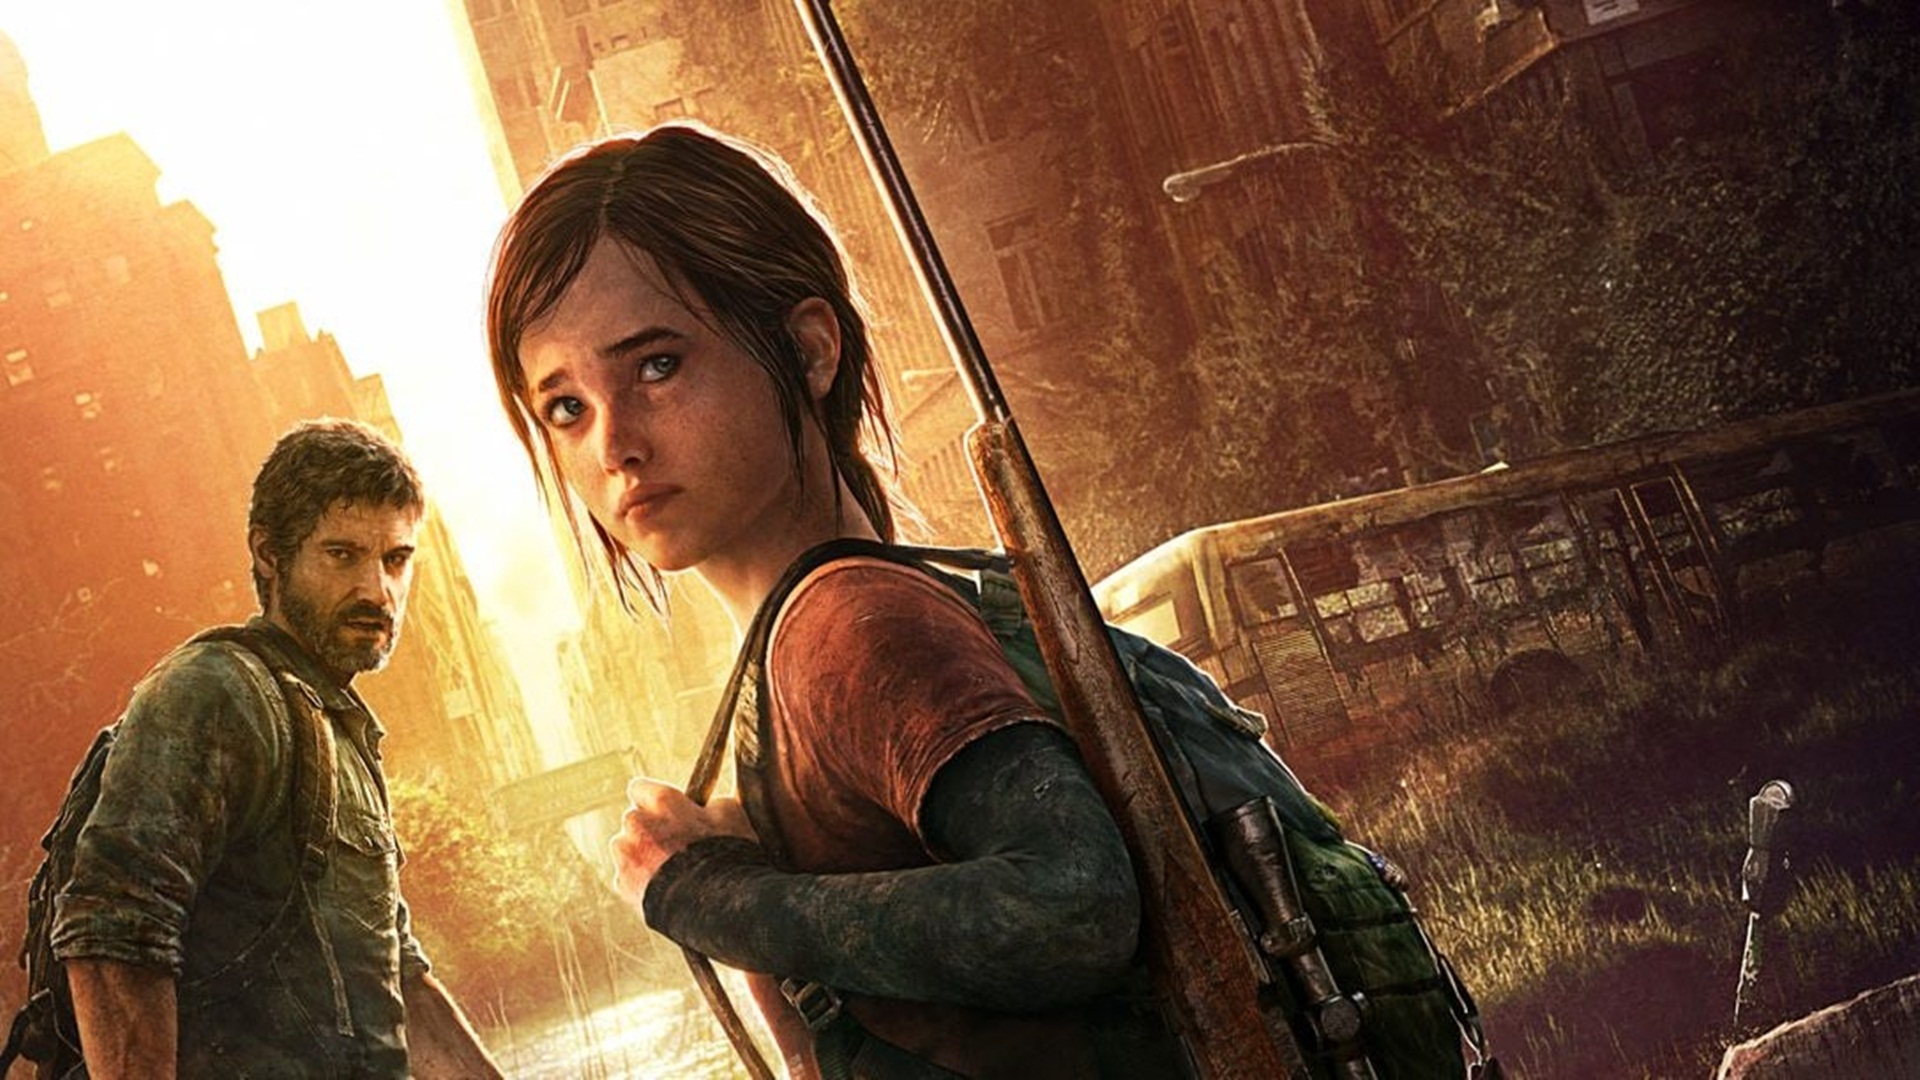 The Last of Us Remake launching simultaneously on PS5 and PC in September, GamersRD